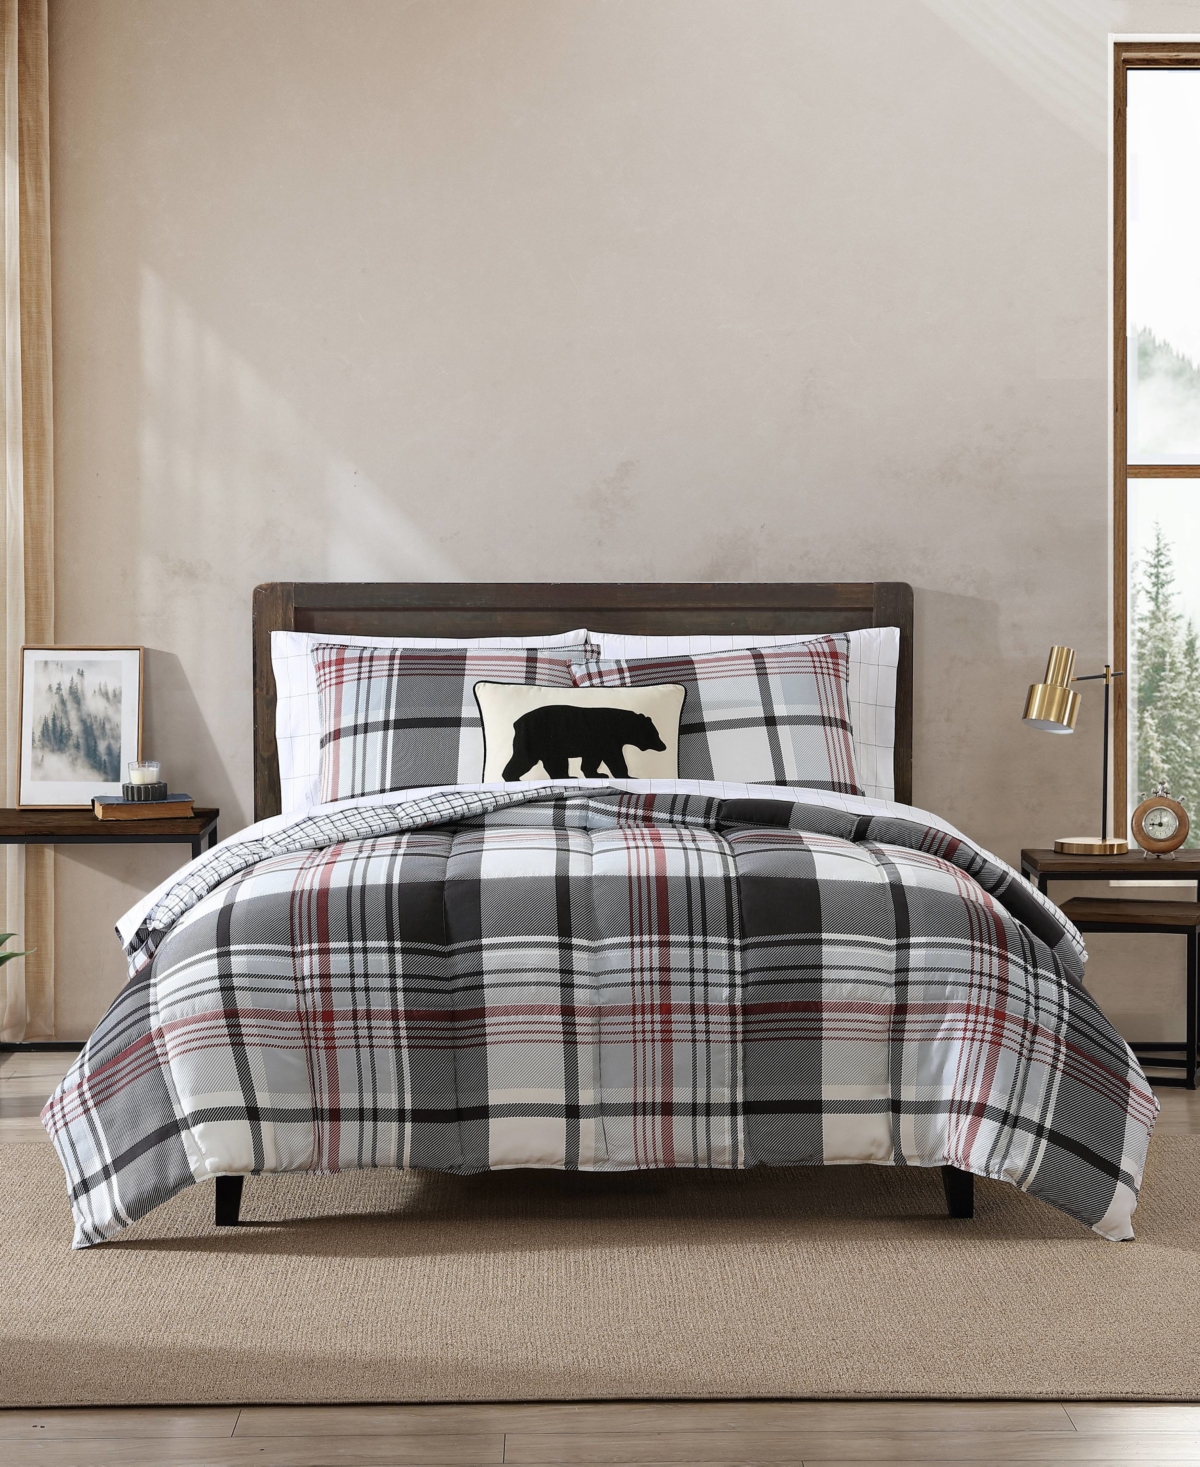 Eddie Bauer Normandy Plaid Micro Suede Reversible 3 Piece Duvet Cover Set, King In Black Red